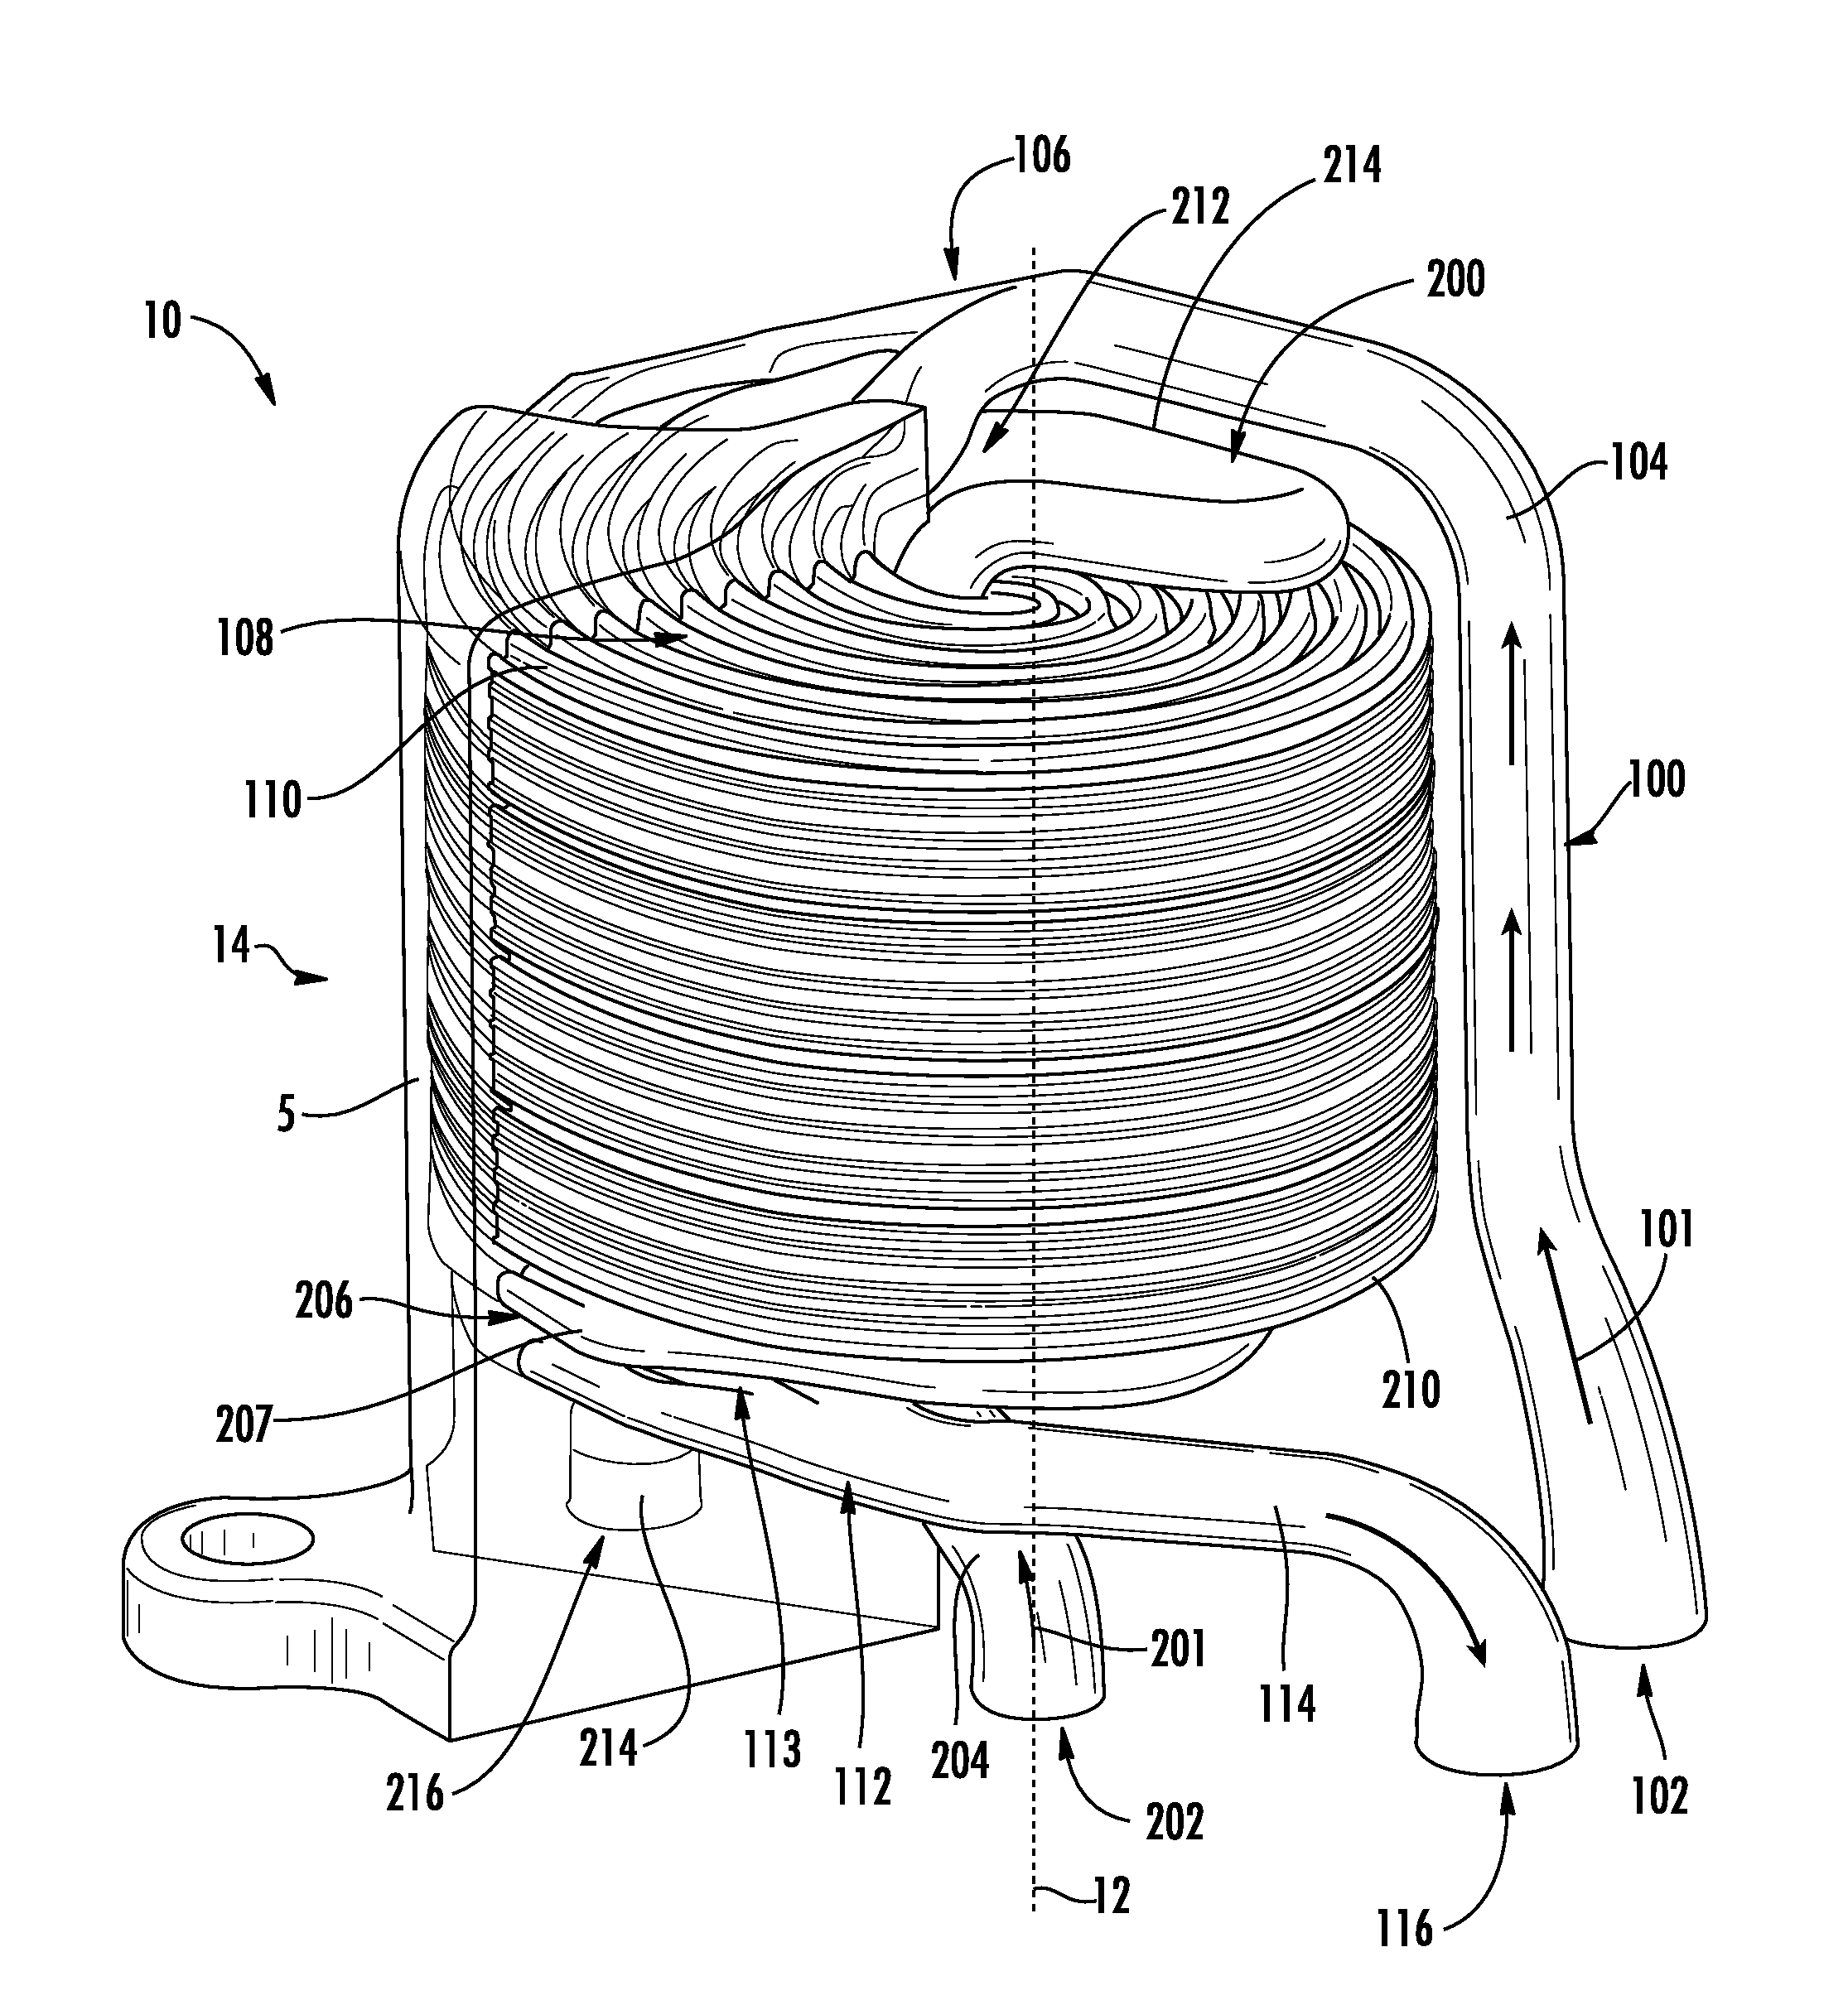 Counter-flow heat exchanger with helical passages